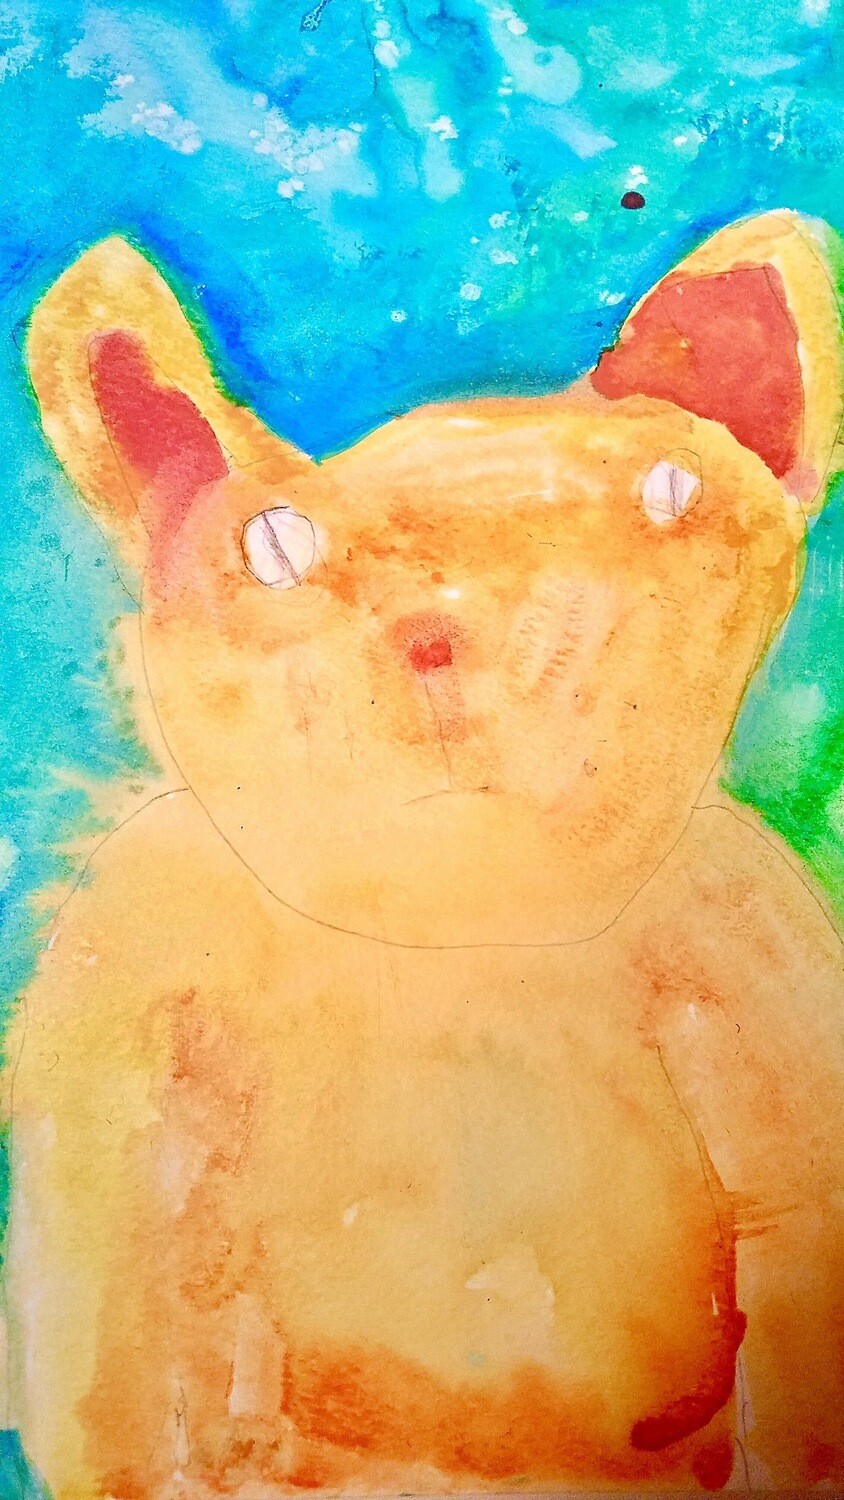 This was her first one! Where it all began. The original was painted on 12/9/2019 while her sister was out of town and she was missing her like crazy. She used a standard watercolor set on professional grade watercolor paper, with pencil and salt resist techniques.